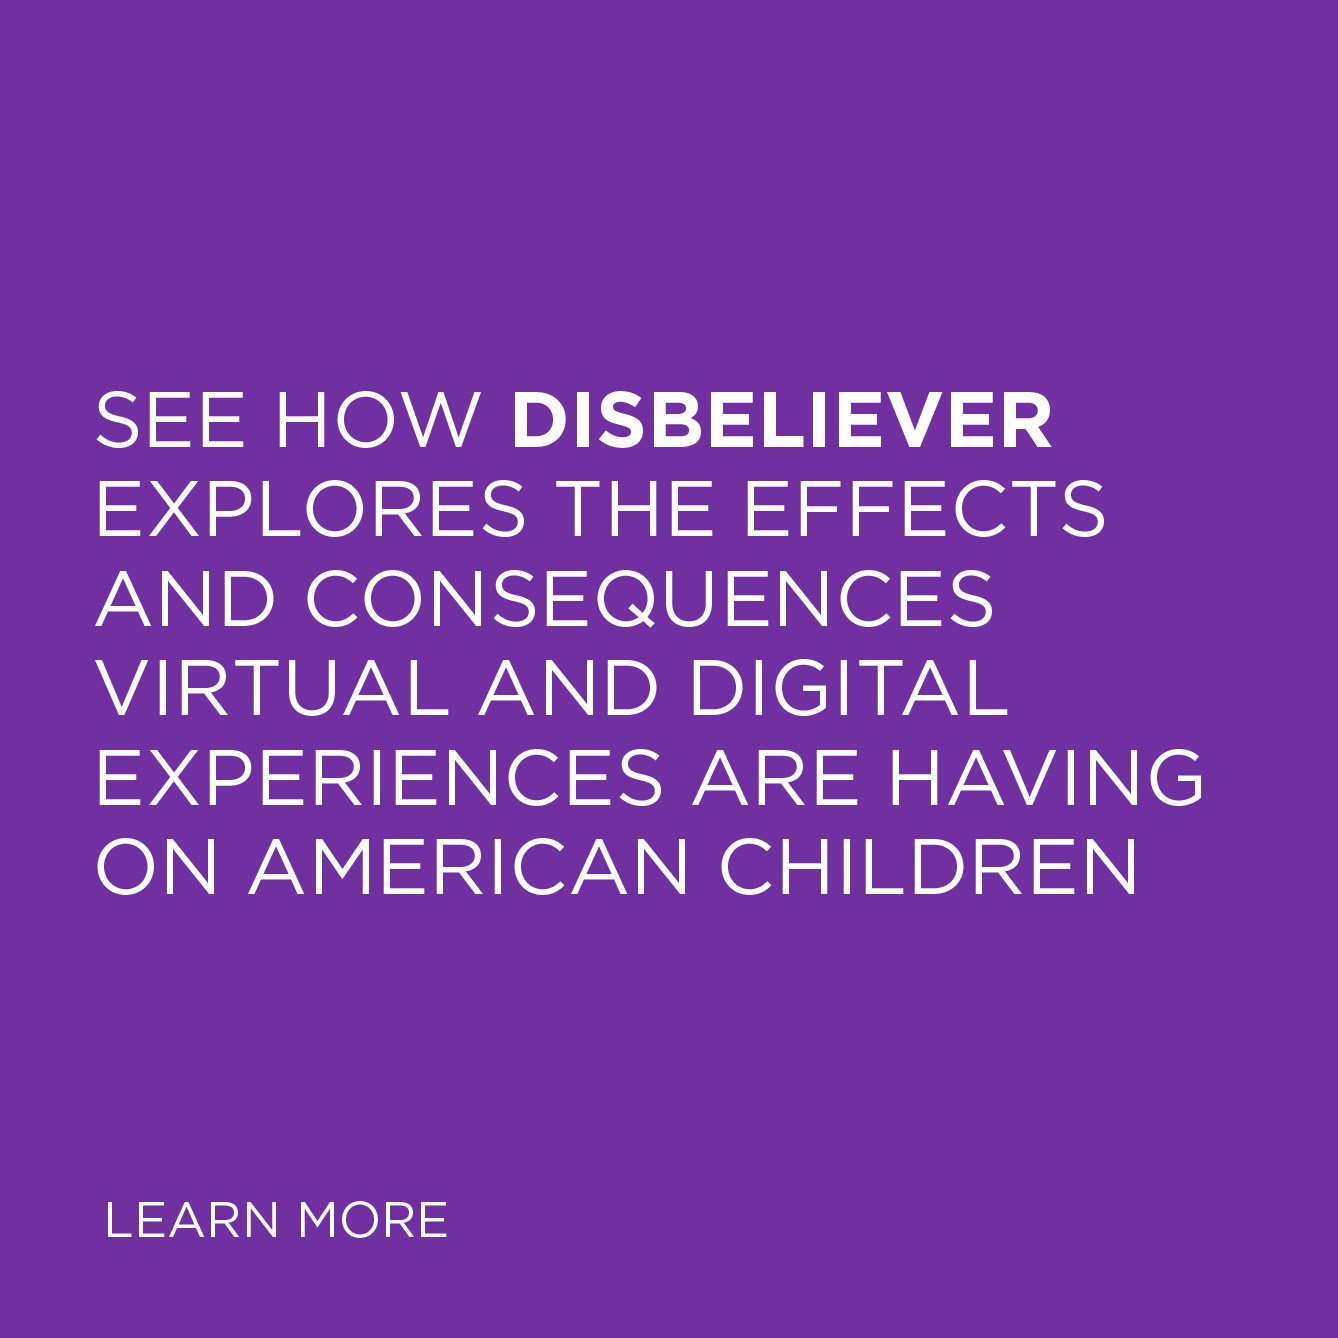 See how Disbeliever explores the effects and consequences virtual and digital experiences are having on American children – watch the video